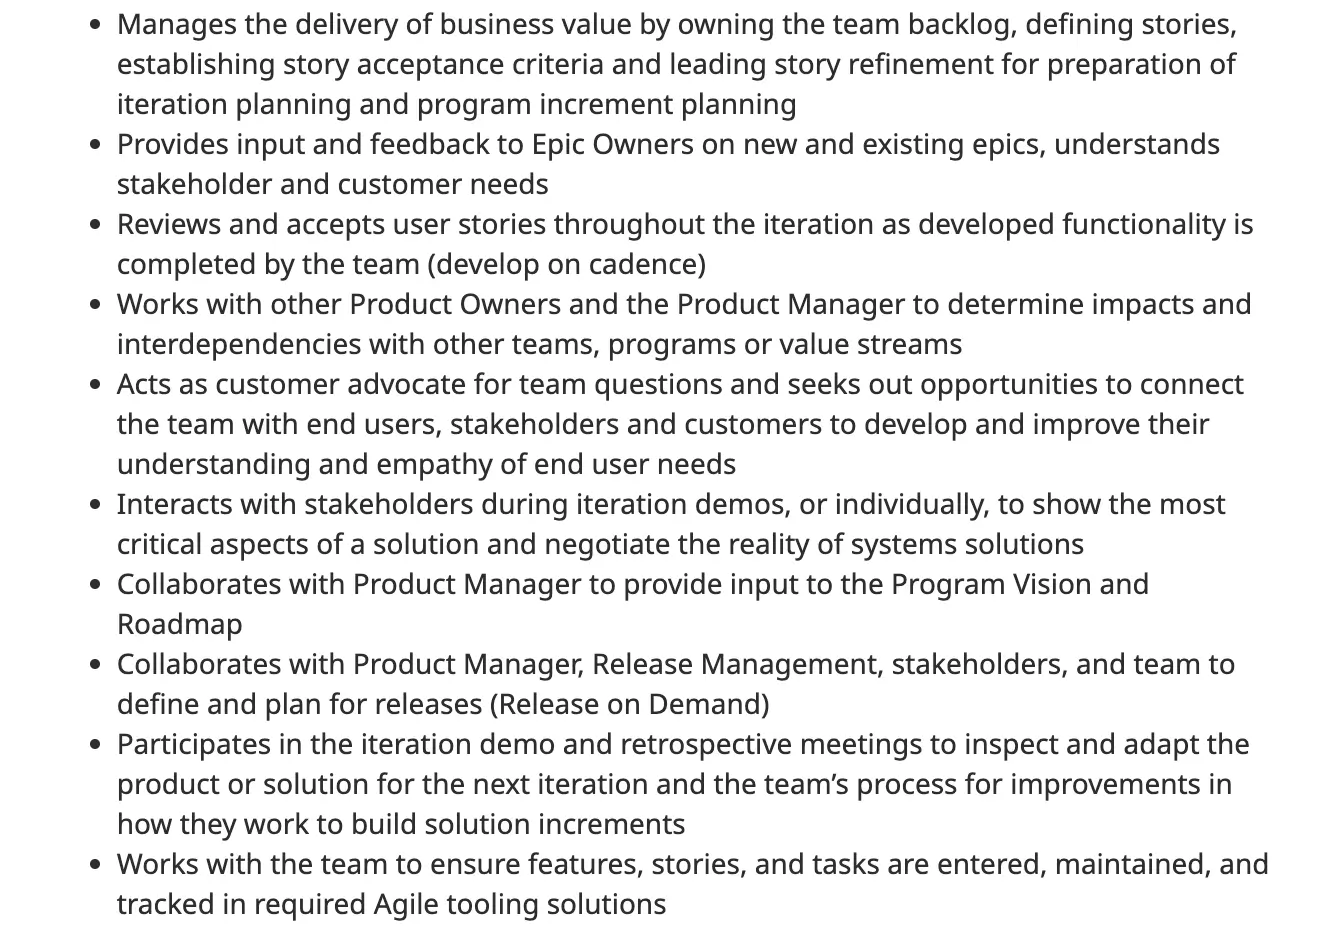 ScreA list of tasks and responsibilities for a product owner role at FedEx.